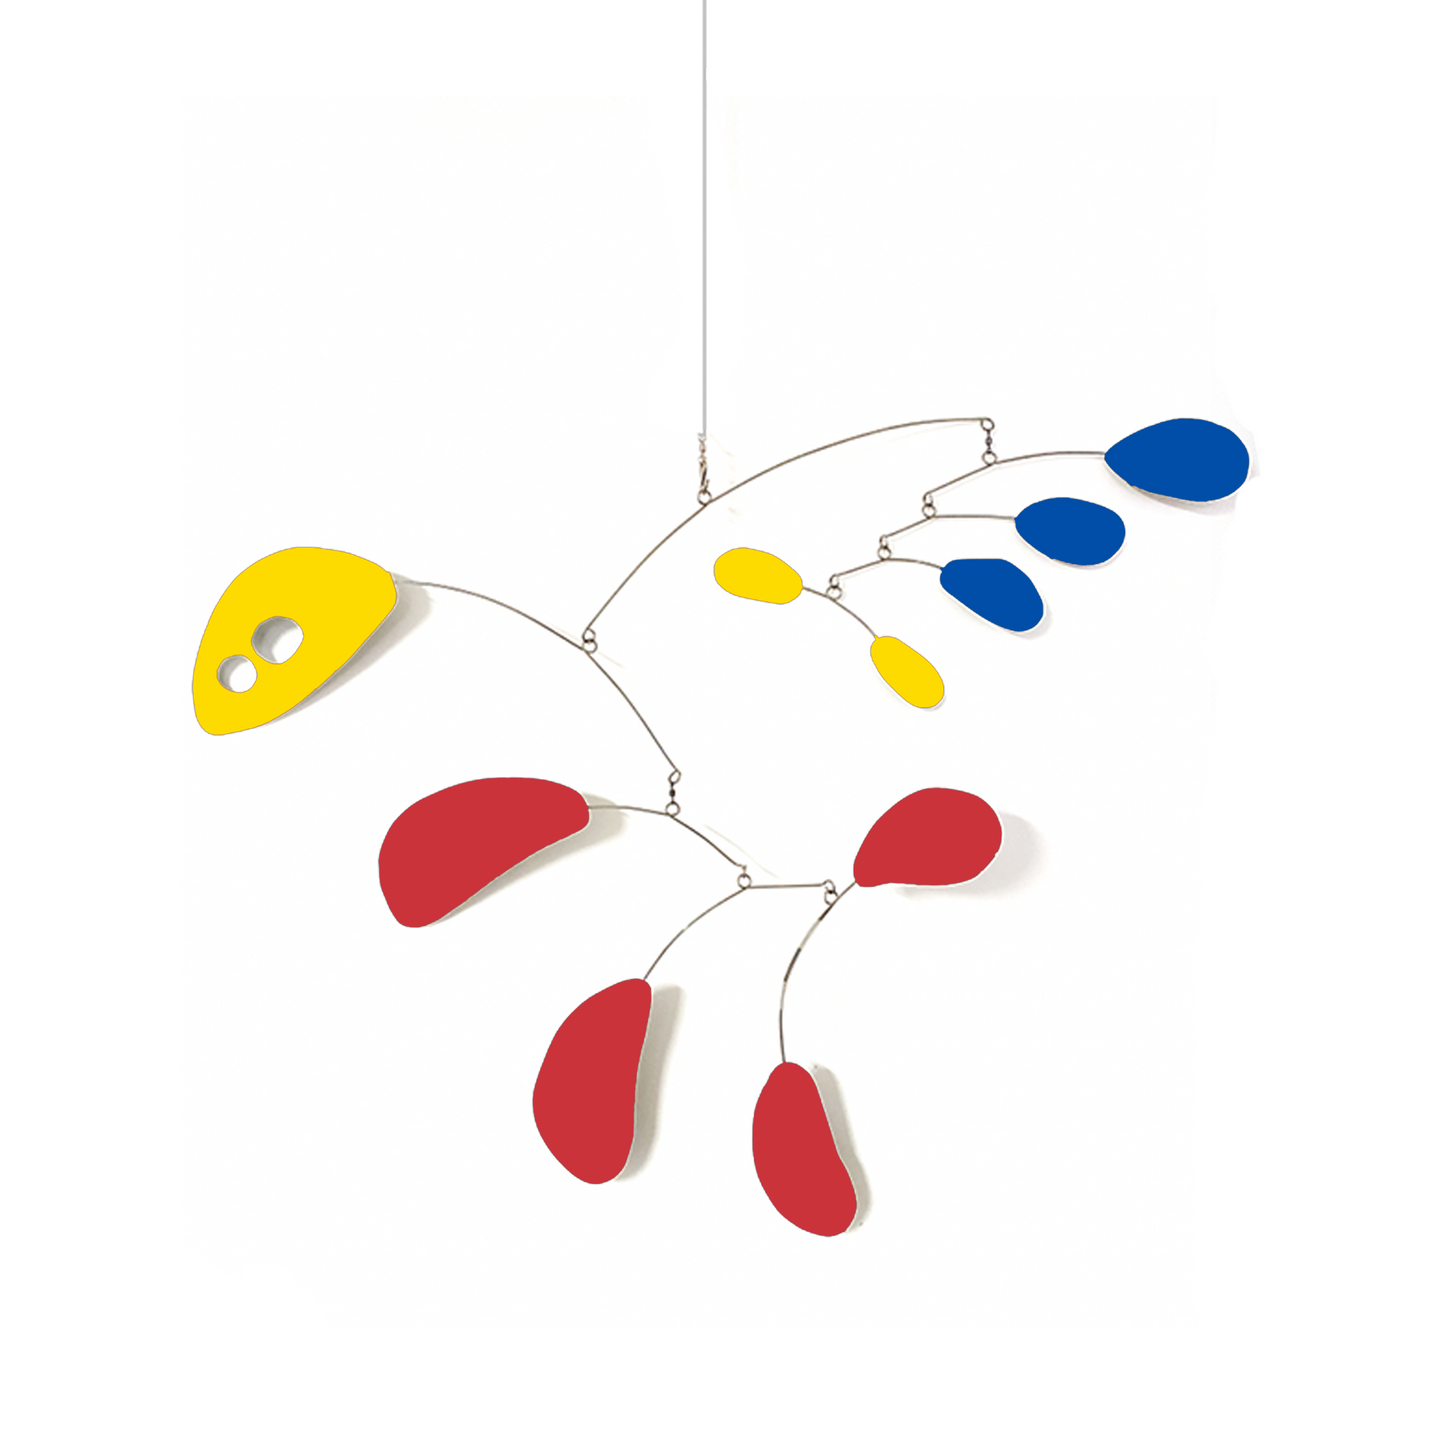 ModCat Mid Century Modern Kinetic Hanging Art Mobile in multi colors of red, blue and yellow by AtomicMobiles.com